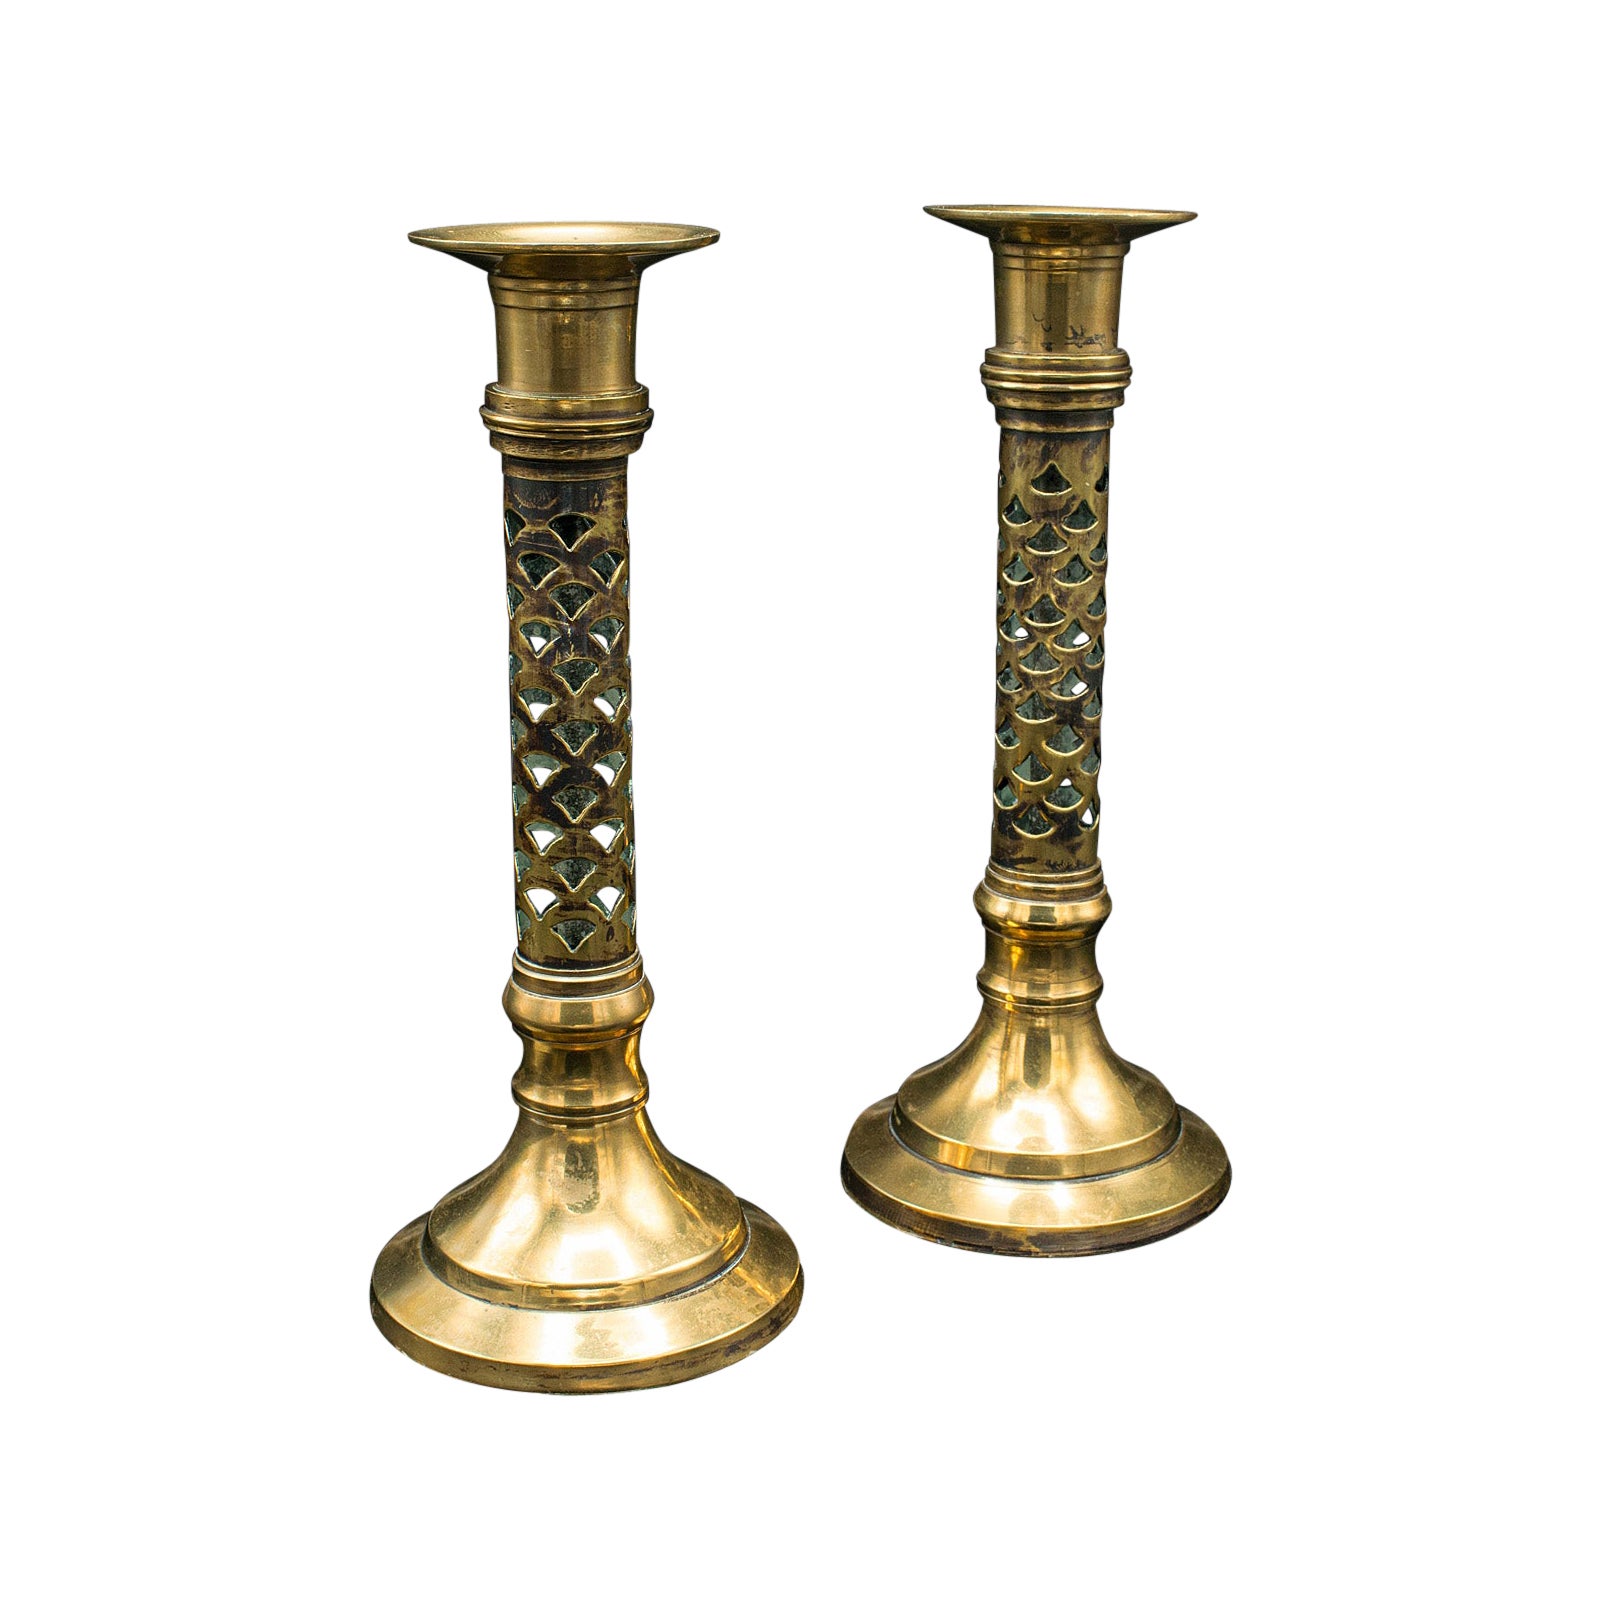 Antique Ecclesiastical Candlesticks, English, Brass, Aesthetic Period, Victorian For Sale